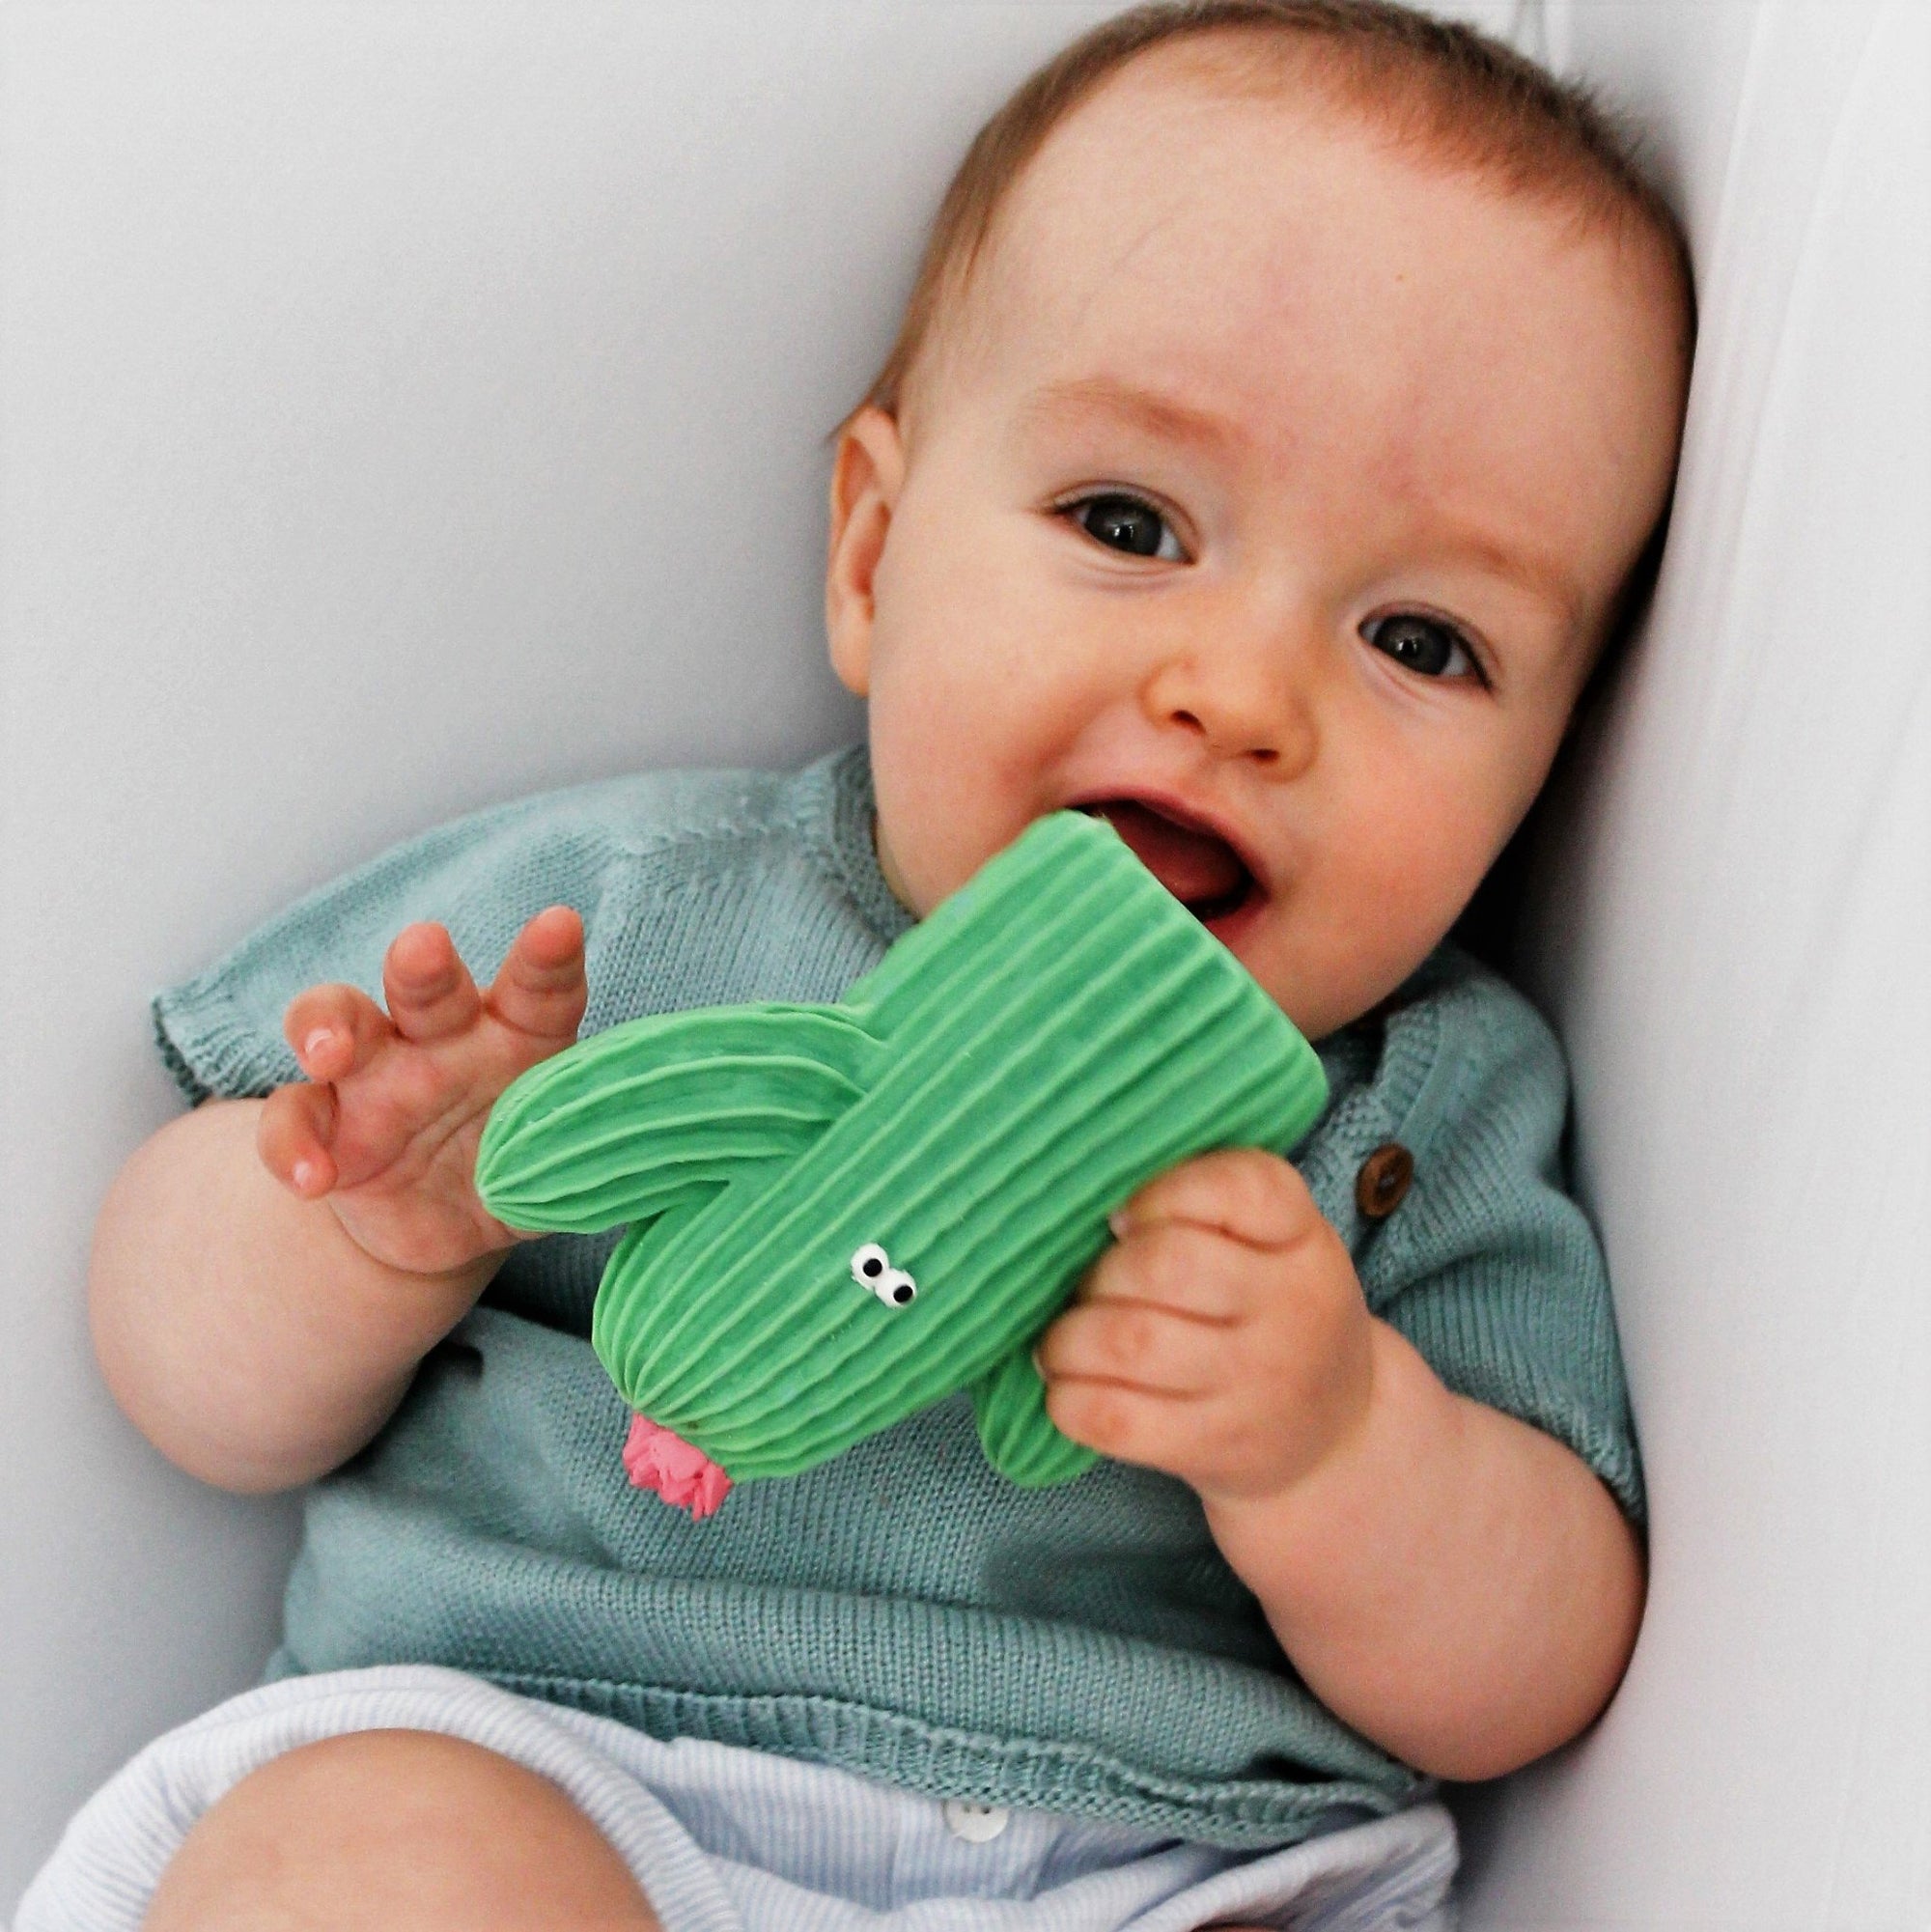 Green Cactus Baby Gift - Rubber Toy For Baby's | Natural Rubber Toys